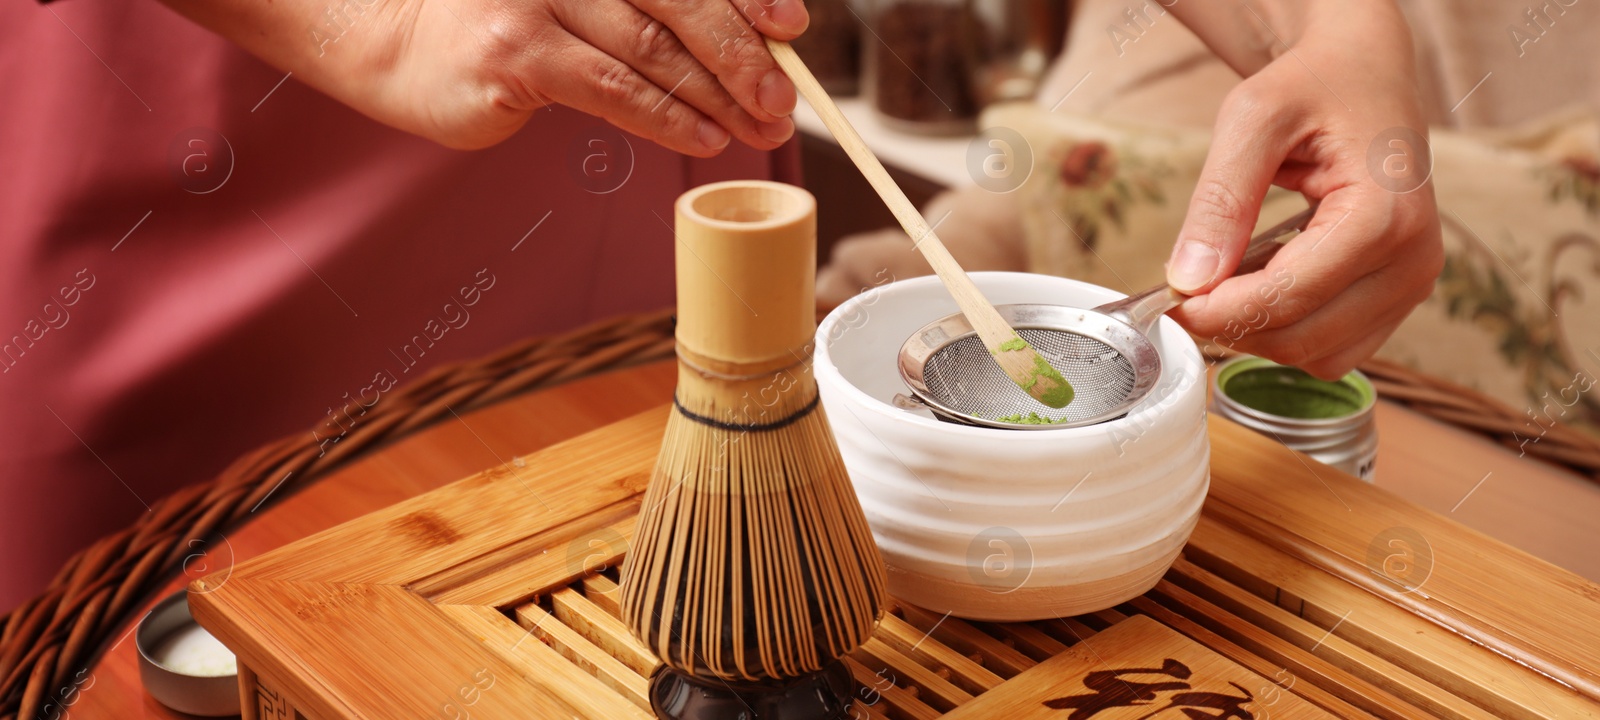 Image of Woman preparing matcha drink at wooden table, closeup. Tea ceremony